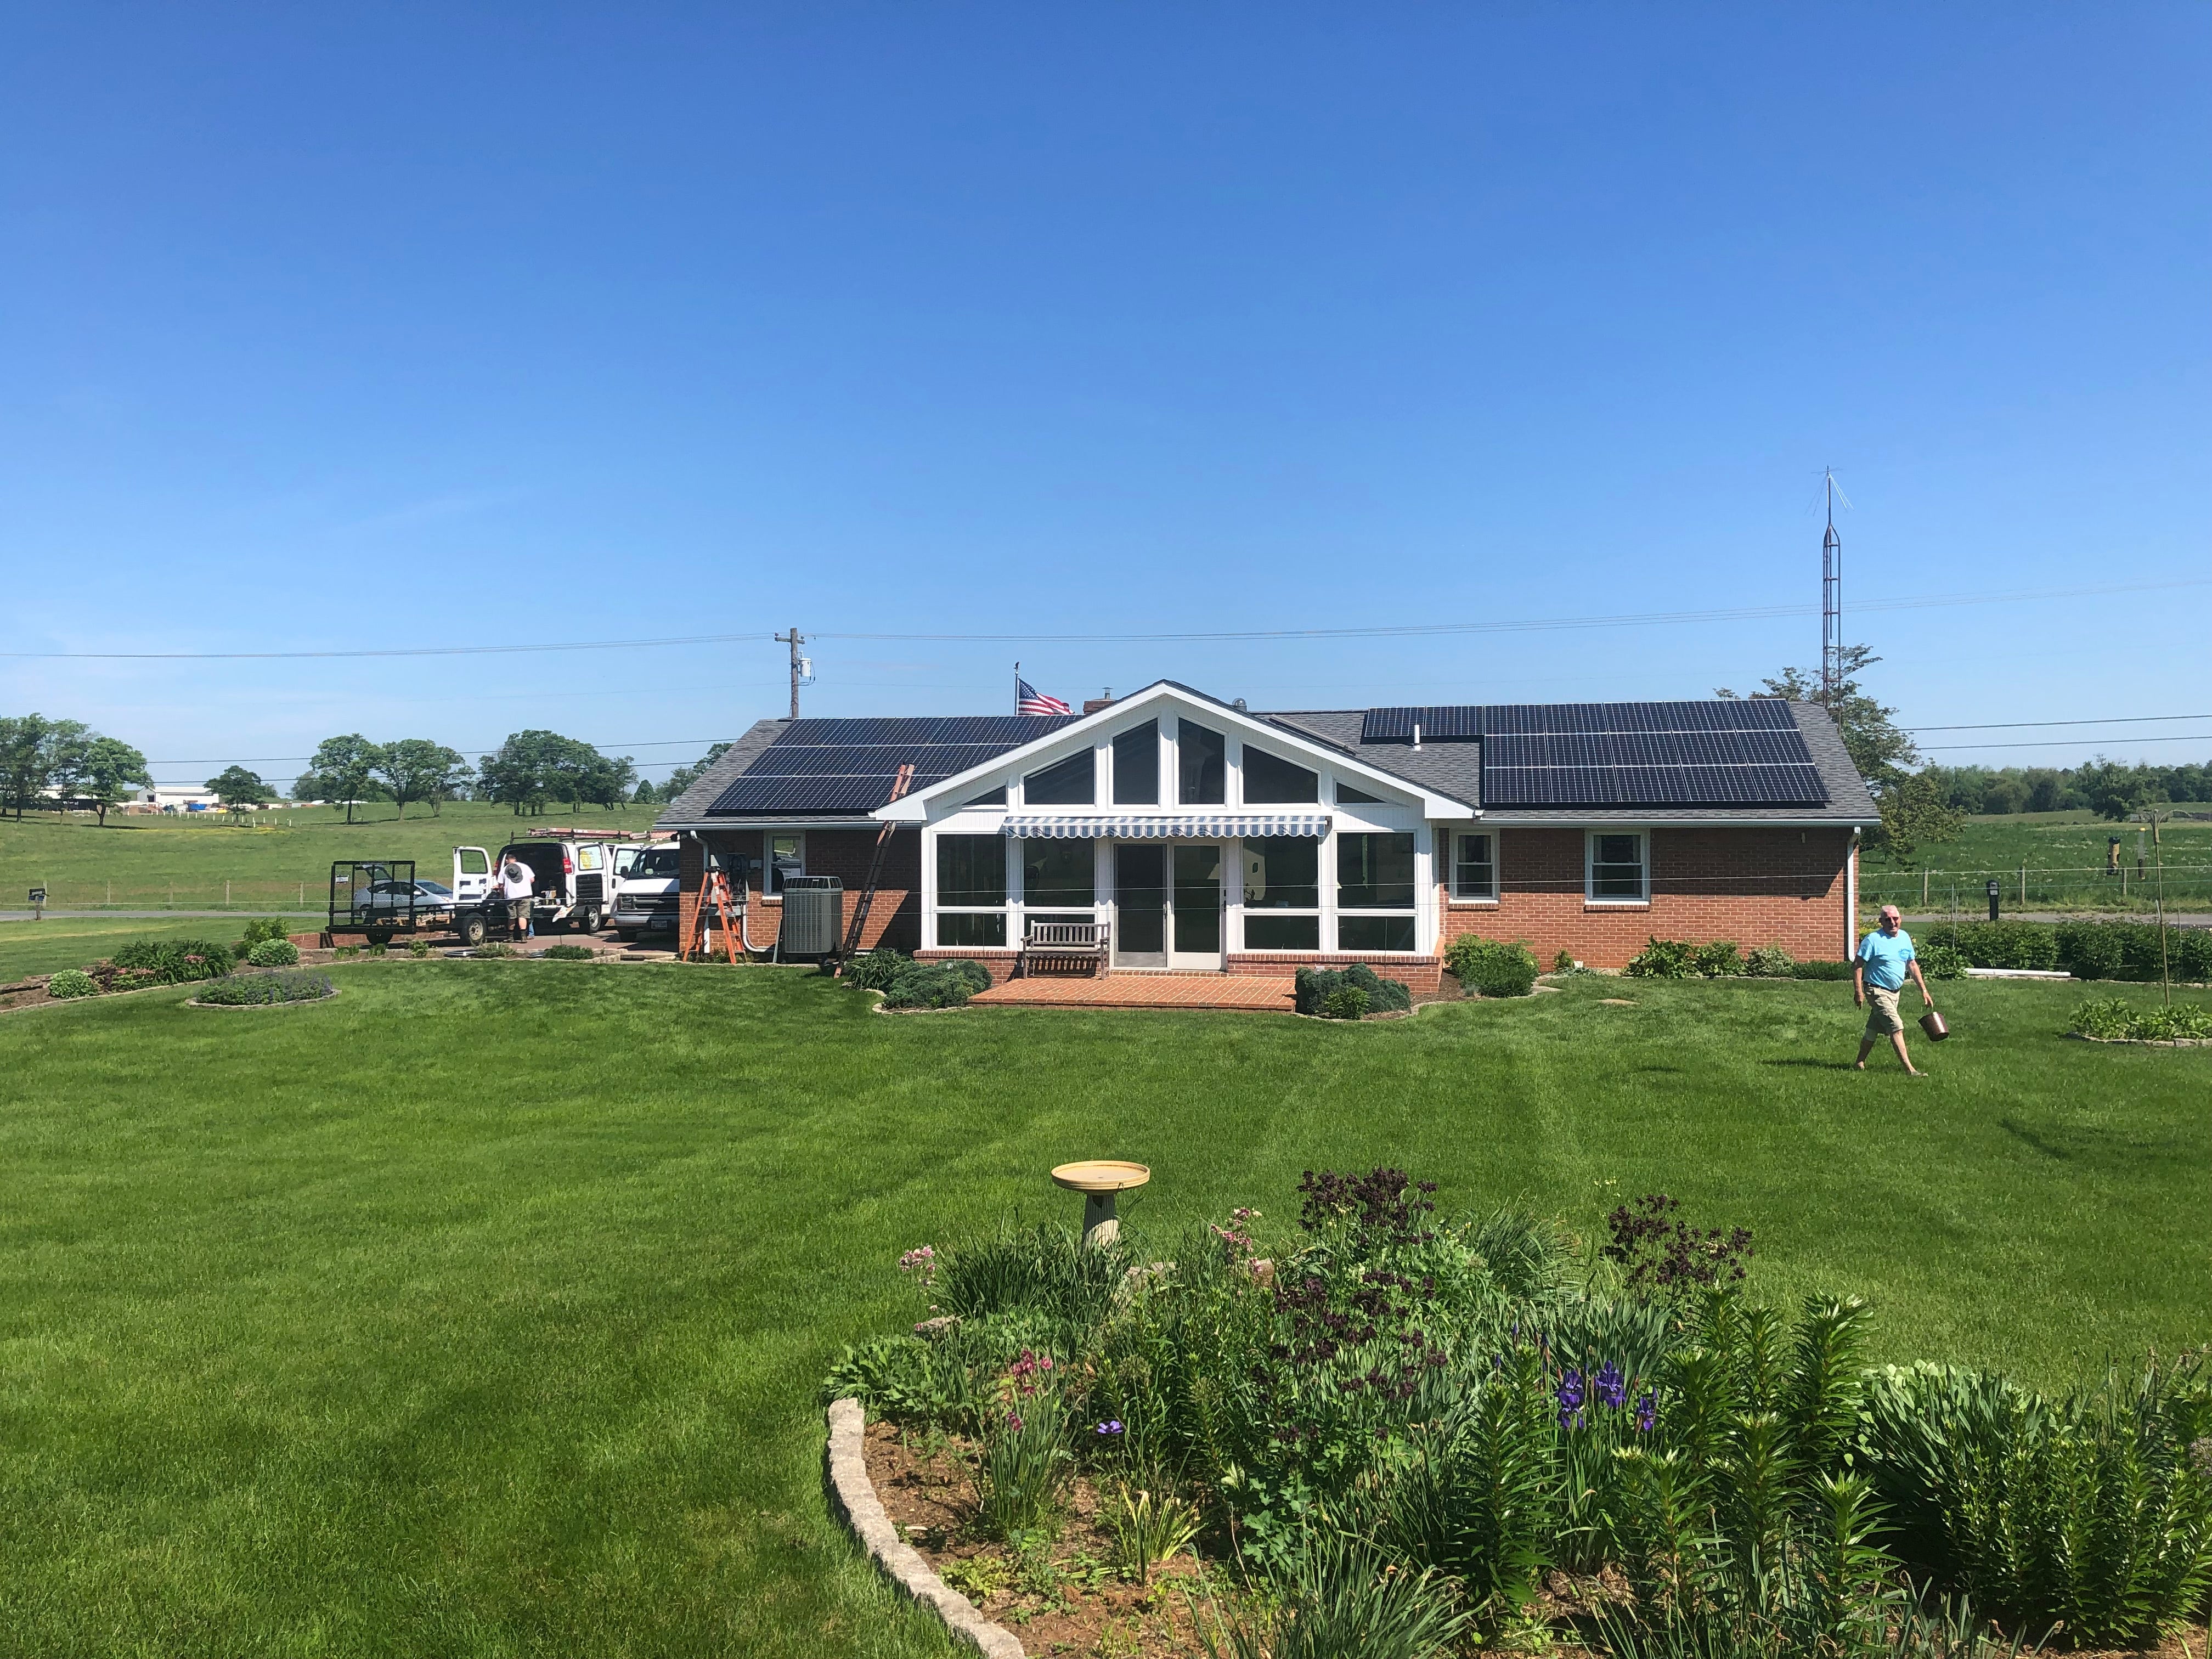 10.89 kW system in Boonsboro, MD